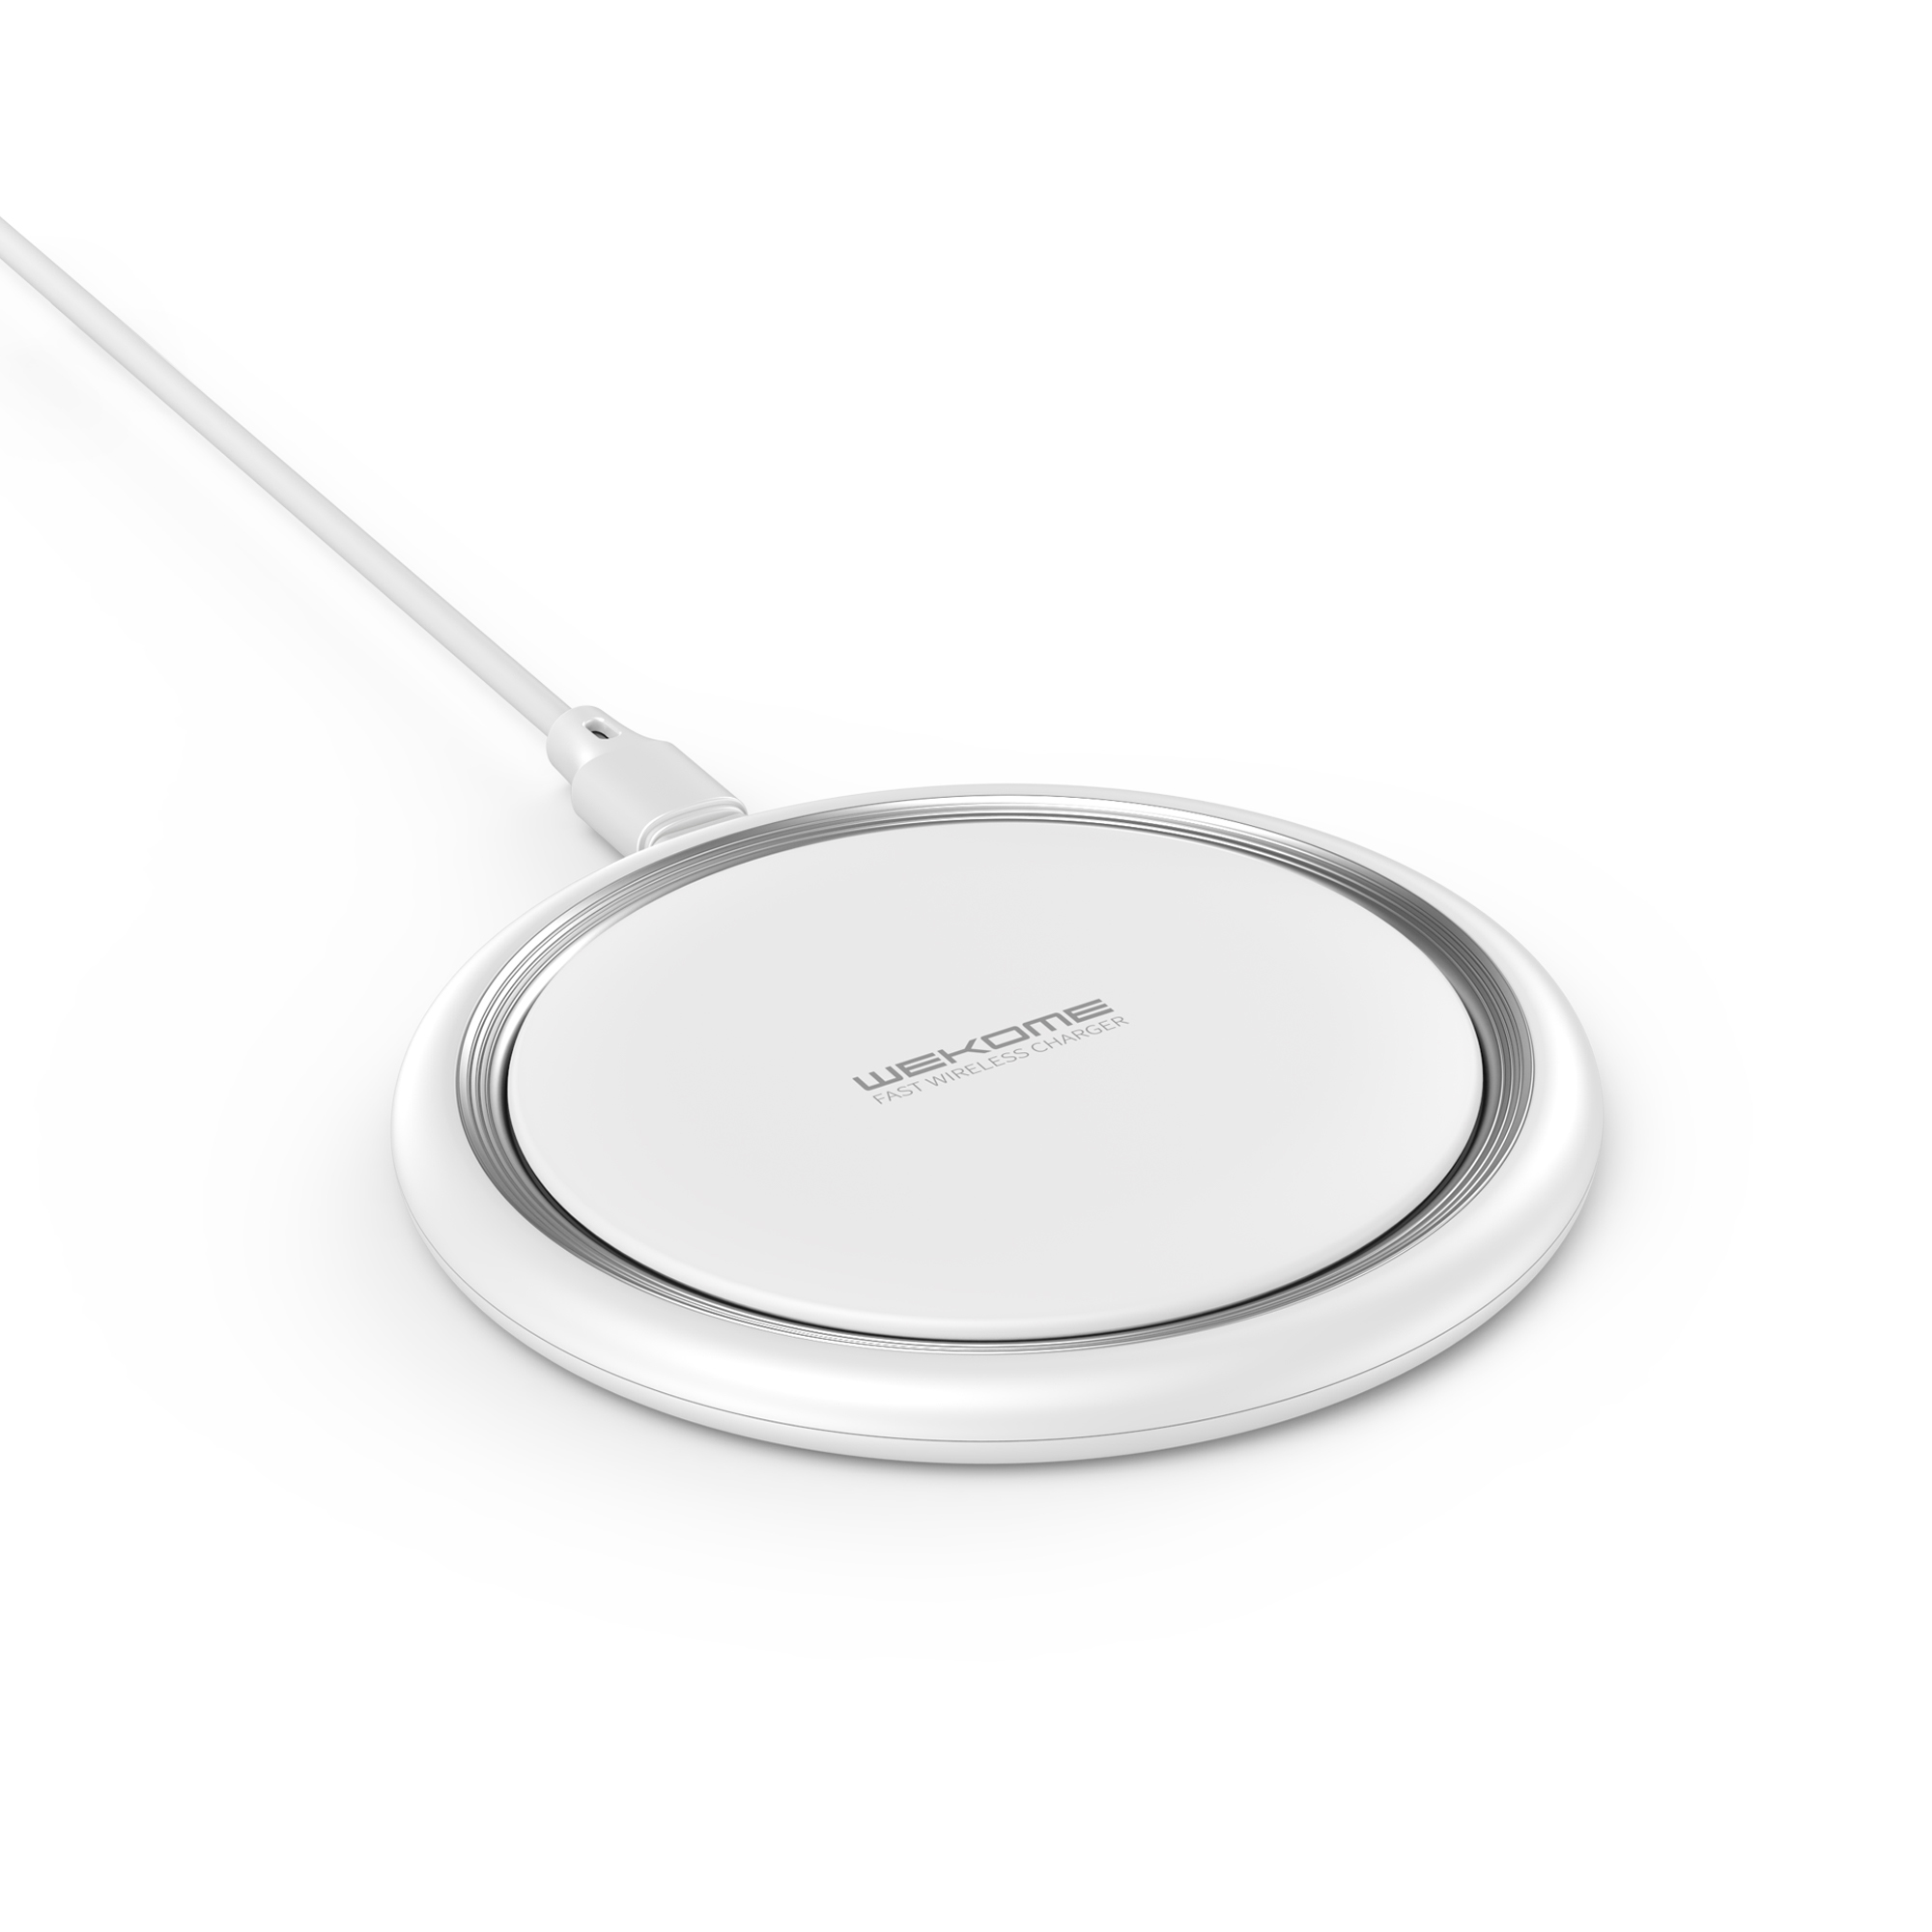 WEKOME Flash Series 15W Wireless Charger